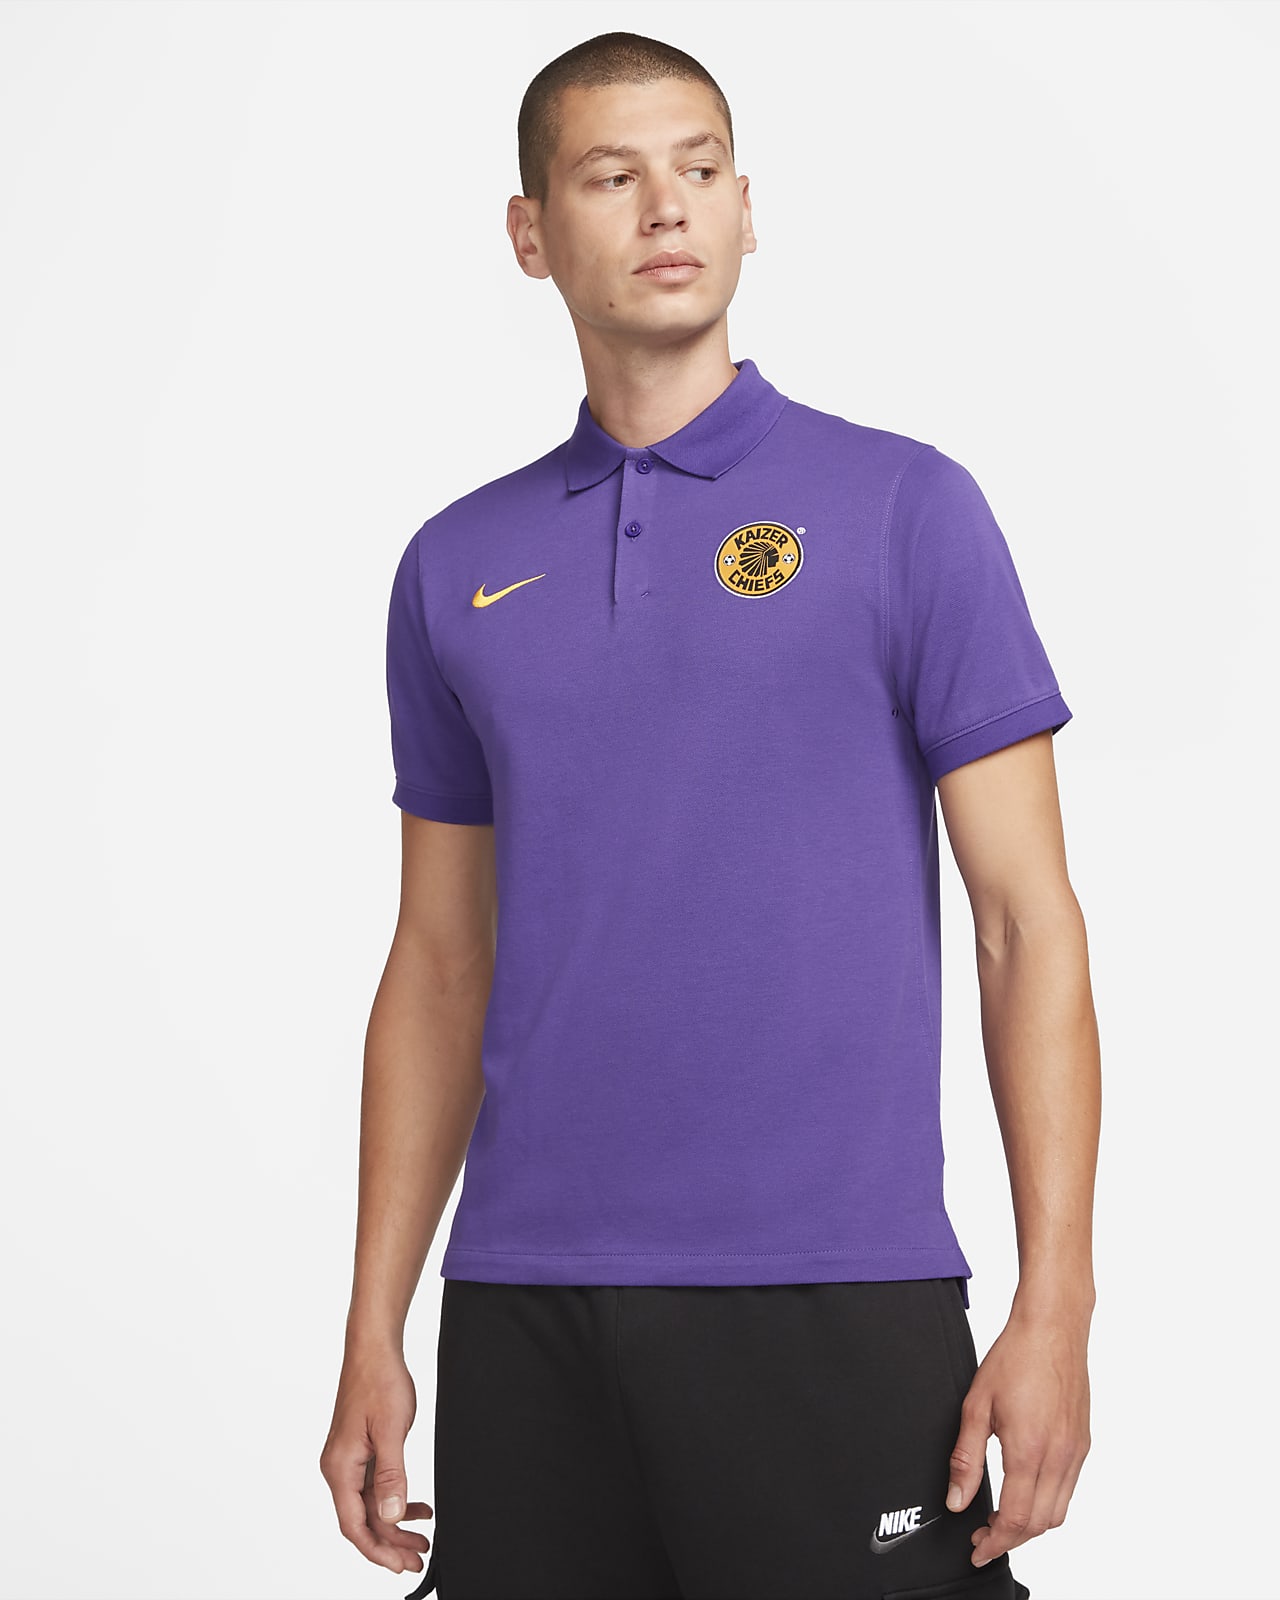 The Nike Polo Kaizer Chiefs F.C. Men's Slim-Fit Polo